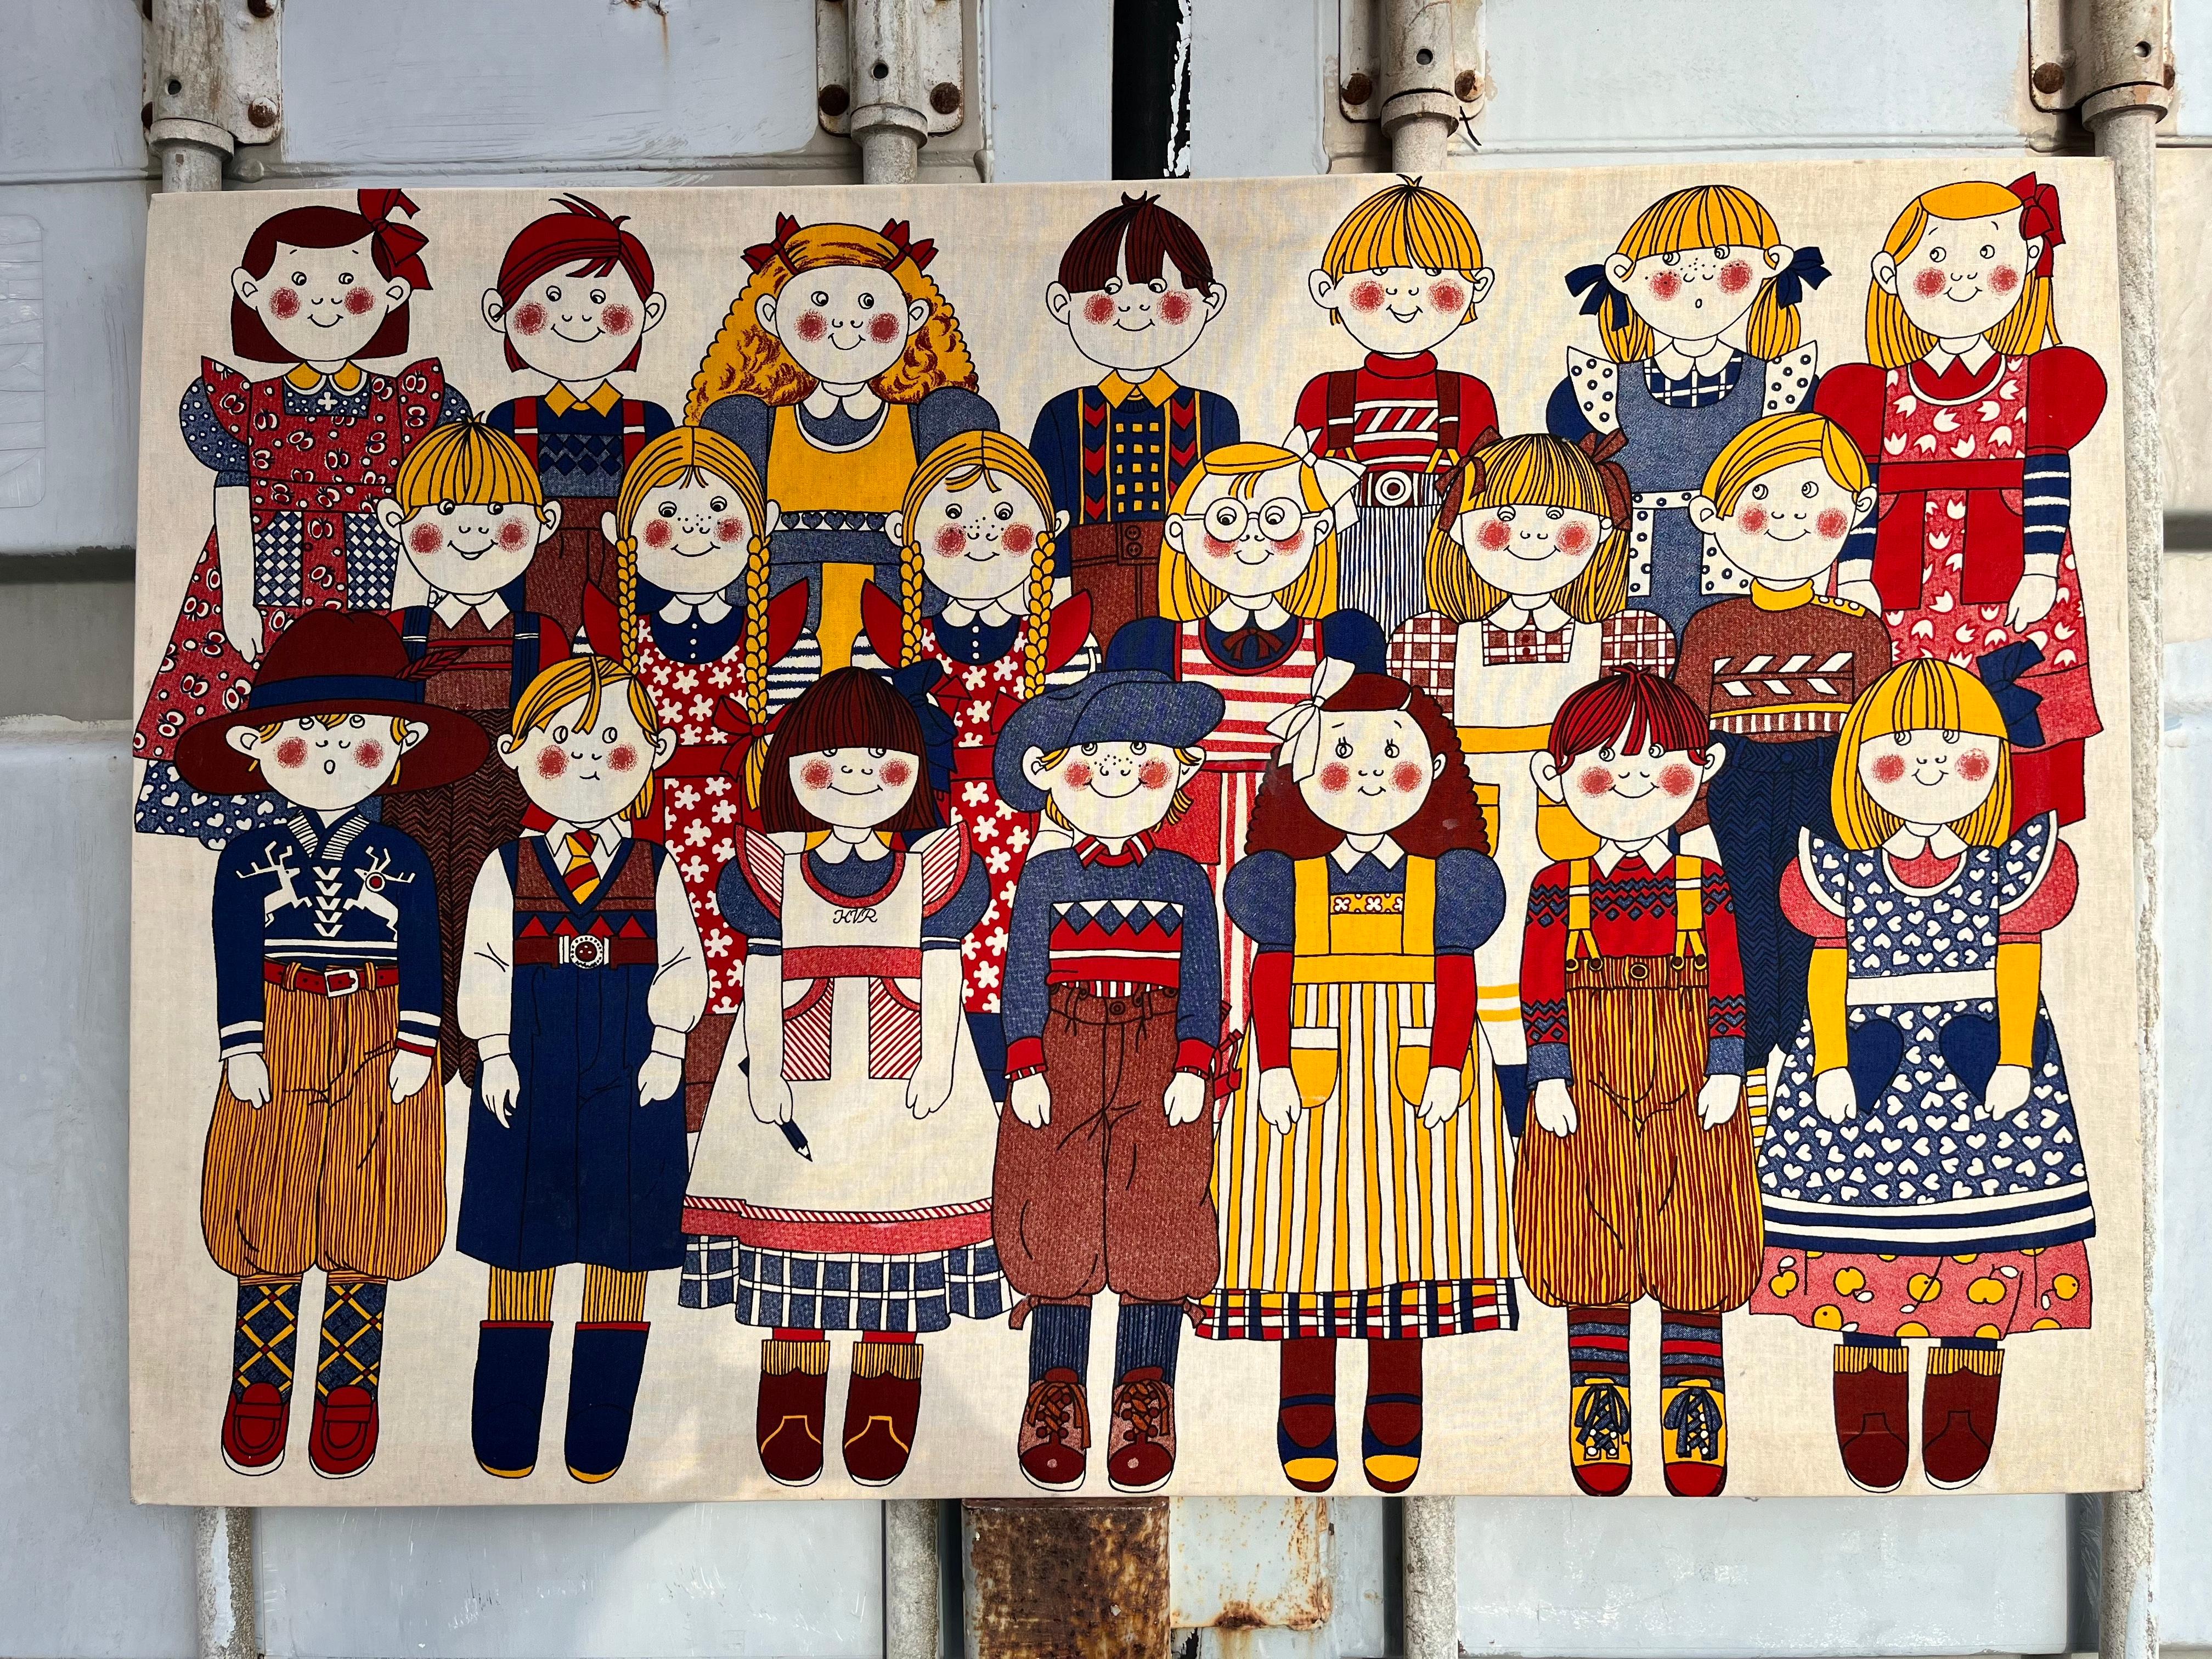 Vintage Scandinavian Wall Textile Children Print by Finlayson, Finland.dated 1971
Features colorful textile print of a group of Scandinavian children in a cartoonish style. 
In good original condition with minor signs of wear consistent with age and